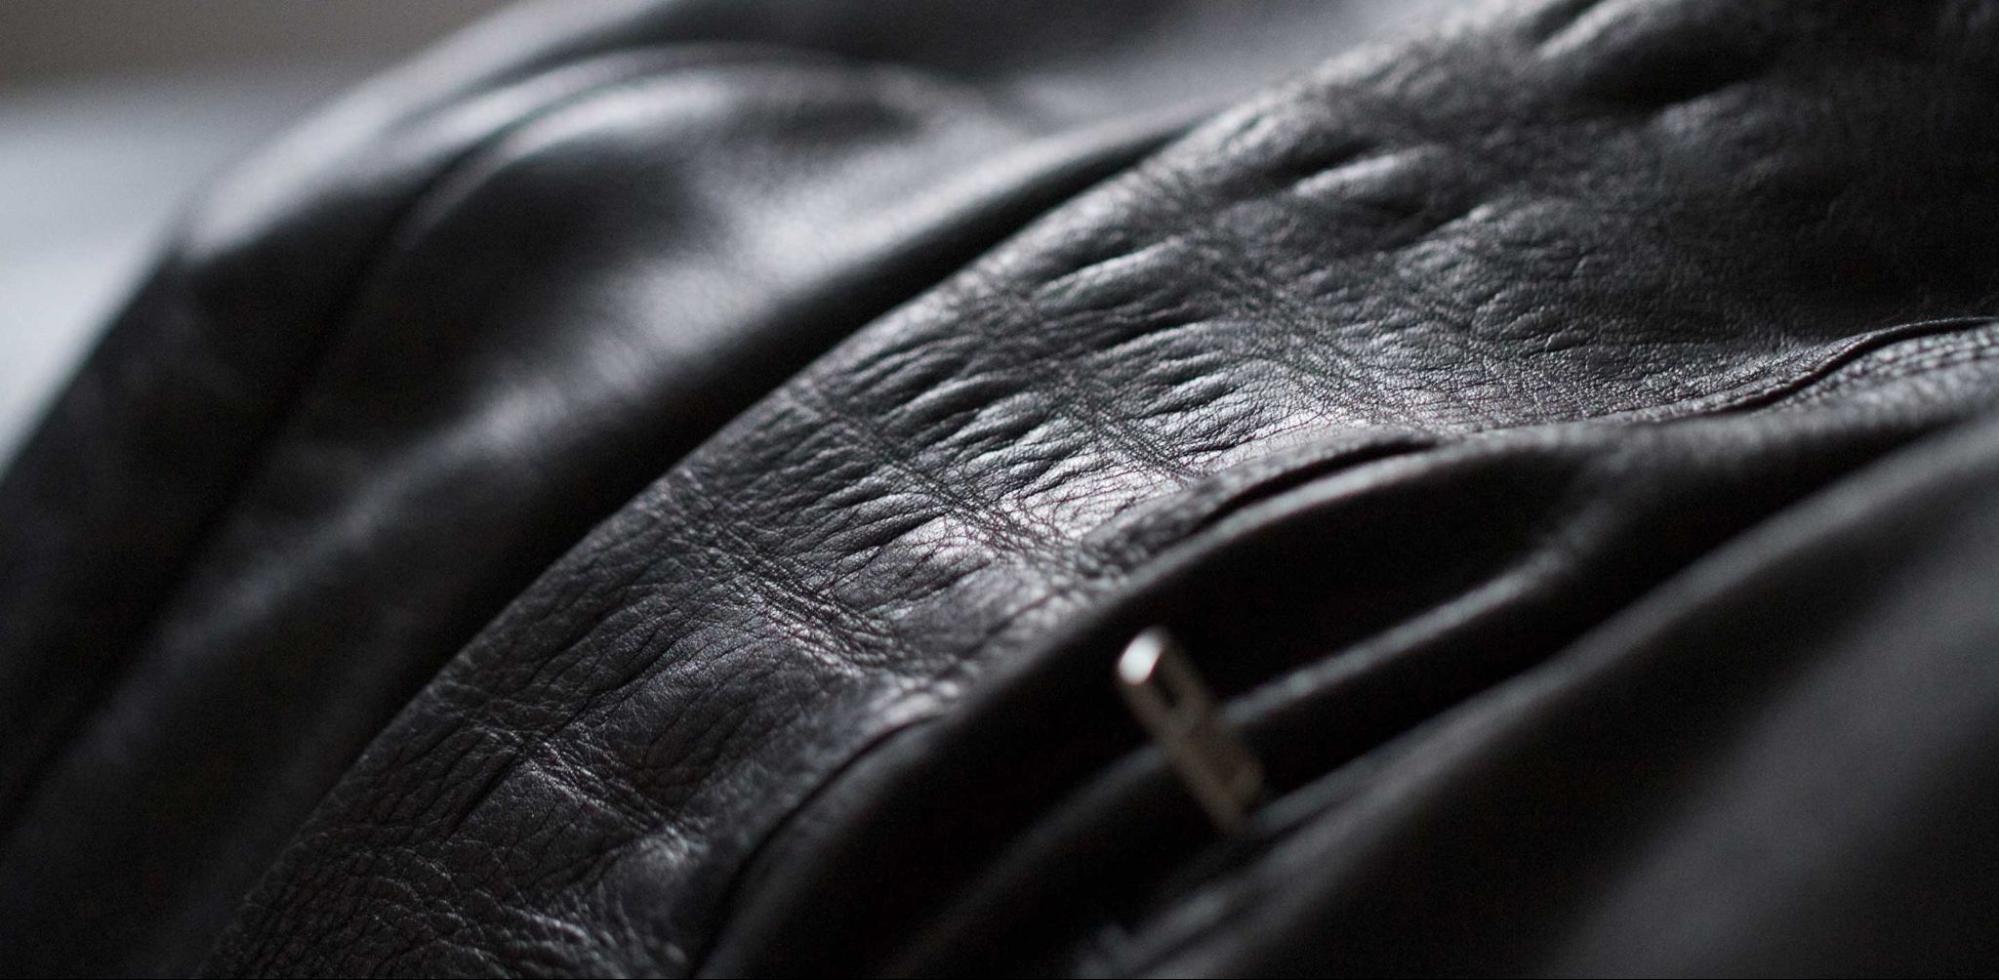 How To Shrink Leather Jacket